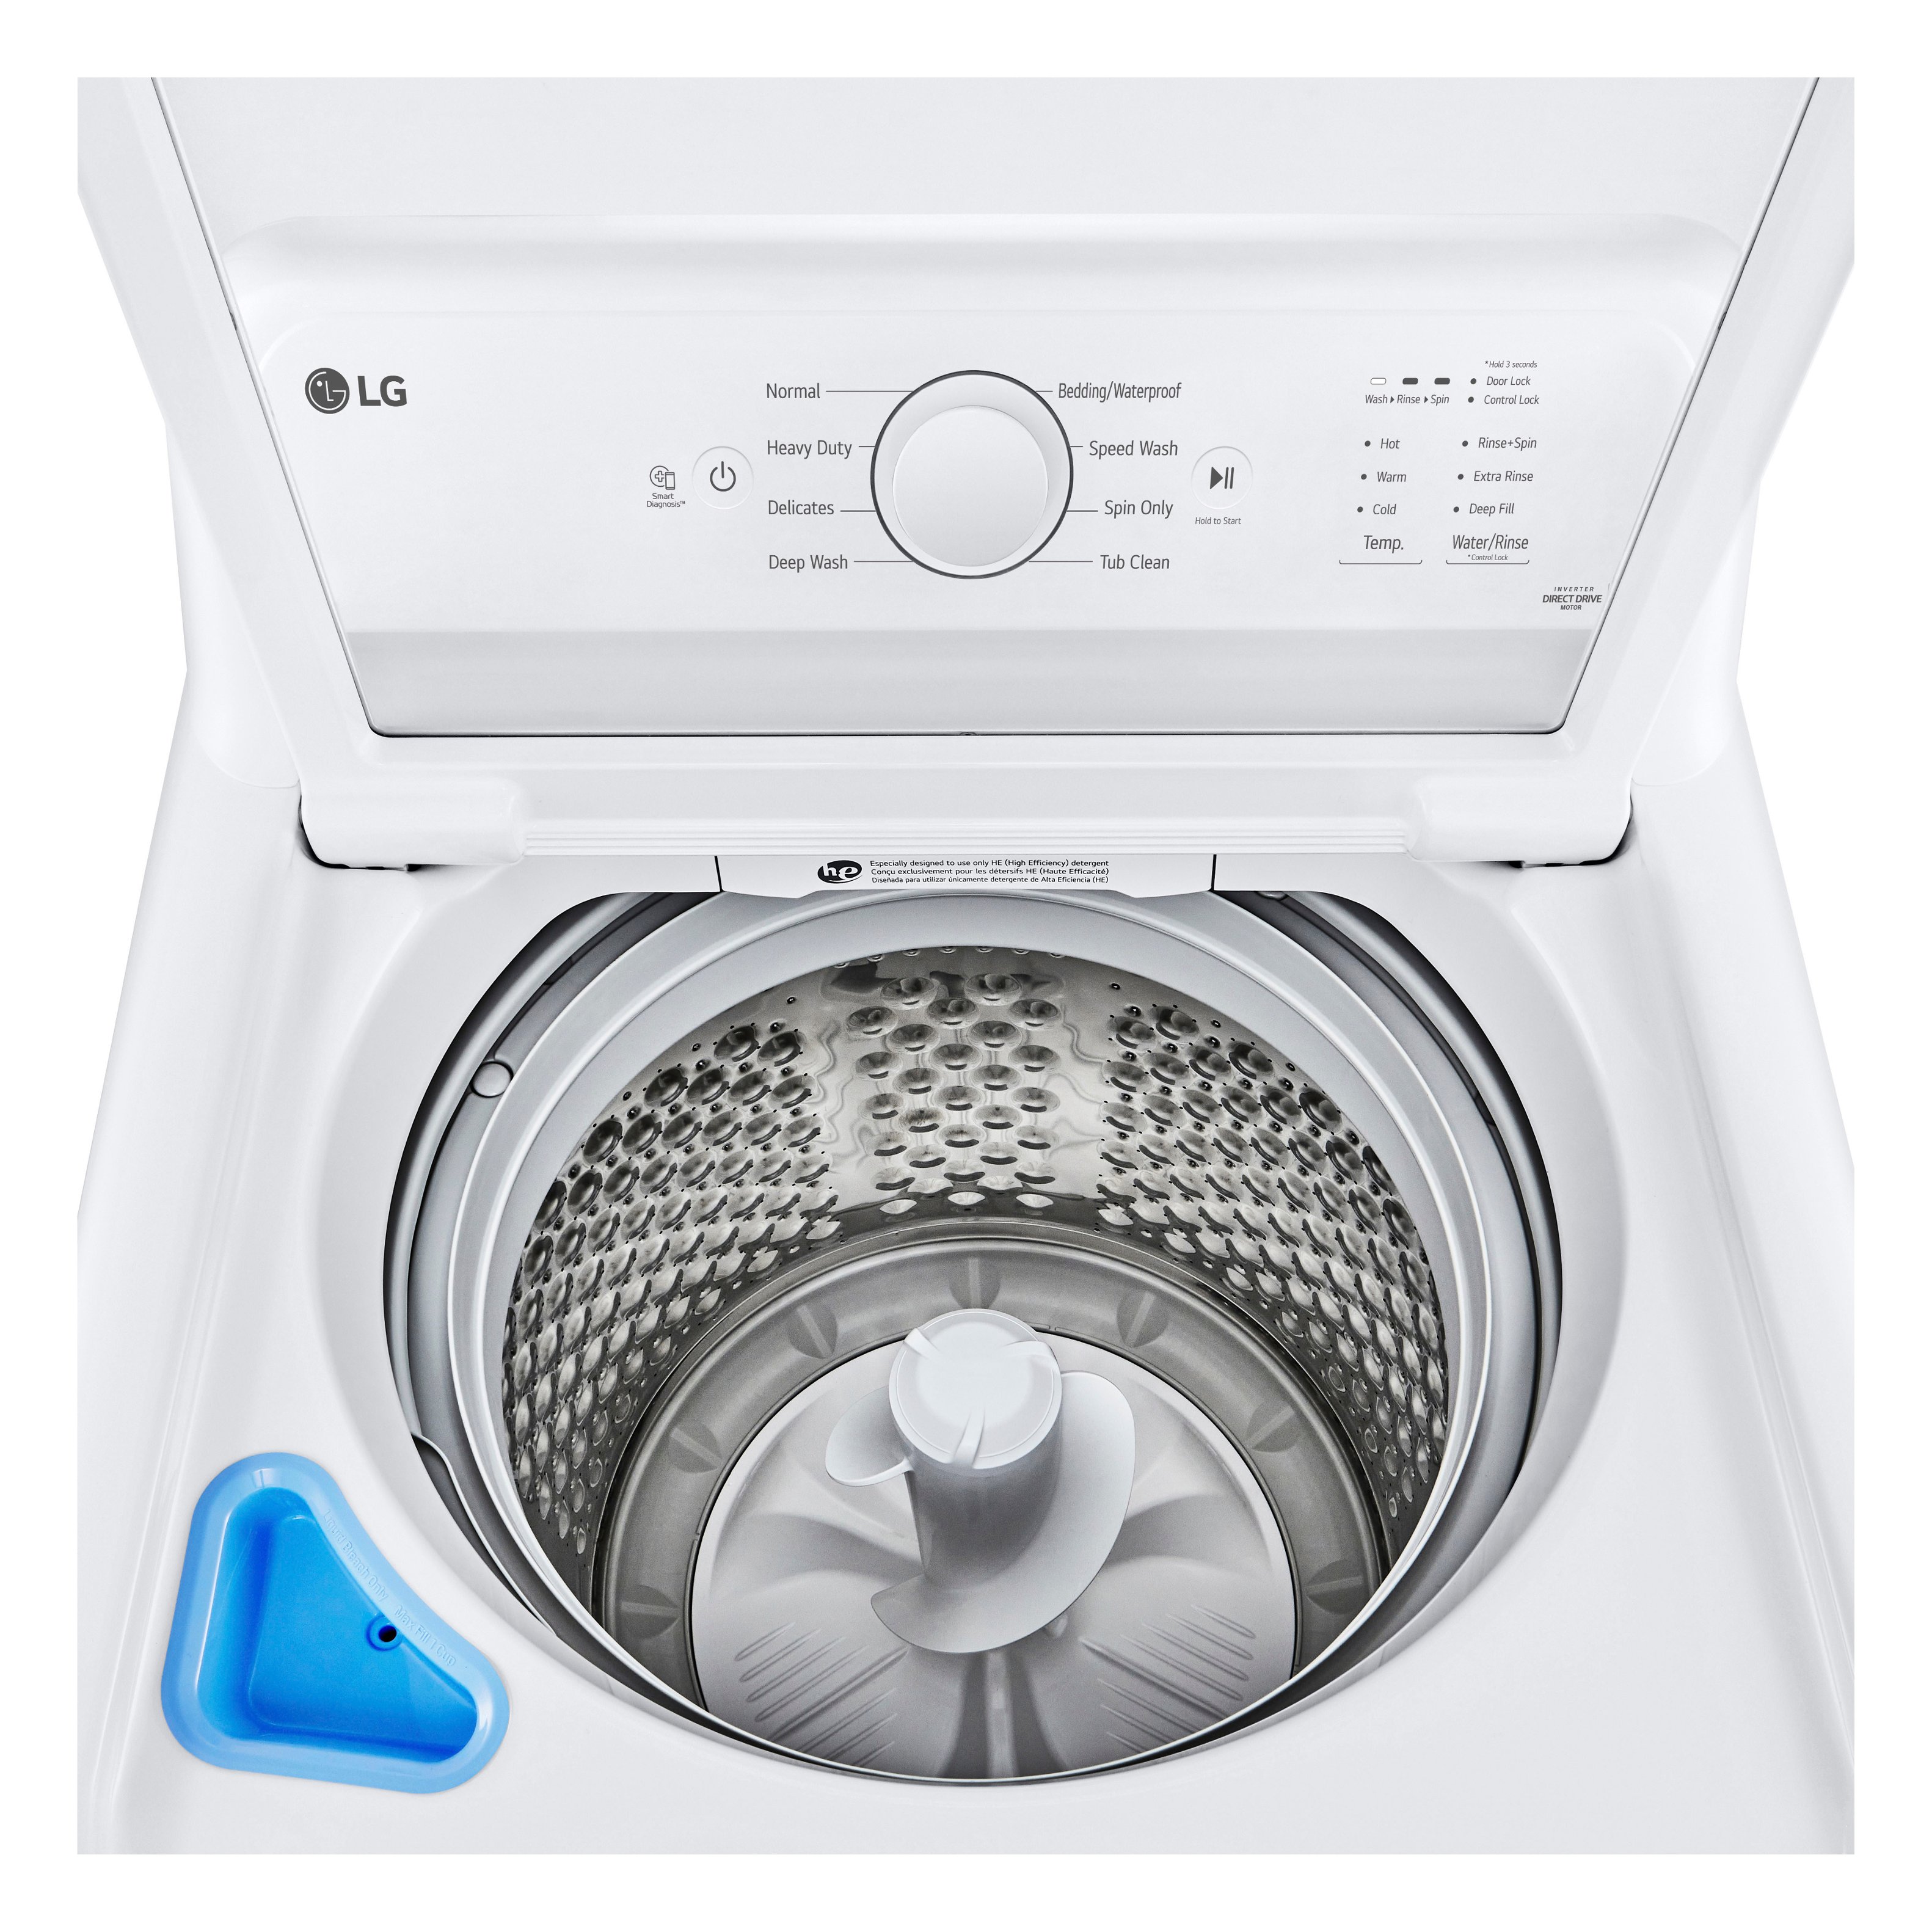 Buy Washer with WT6105CW Lid SlamProof Ft. Load Best 4.1 LG Top Cu. Glass White -